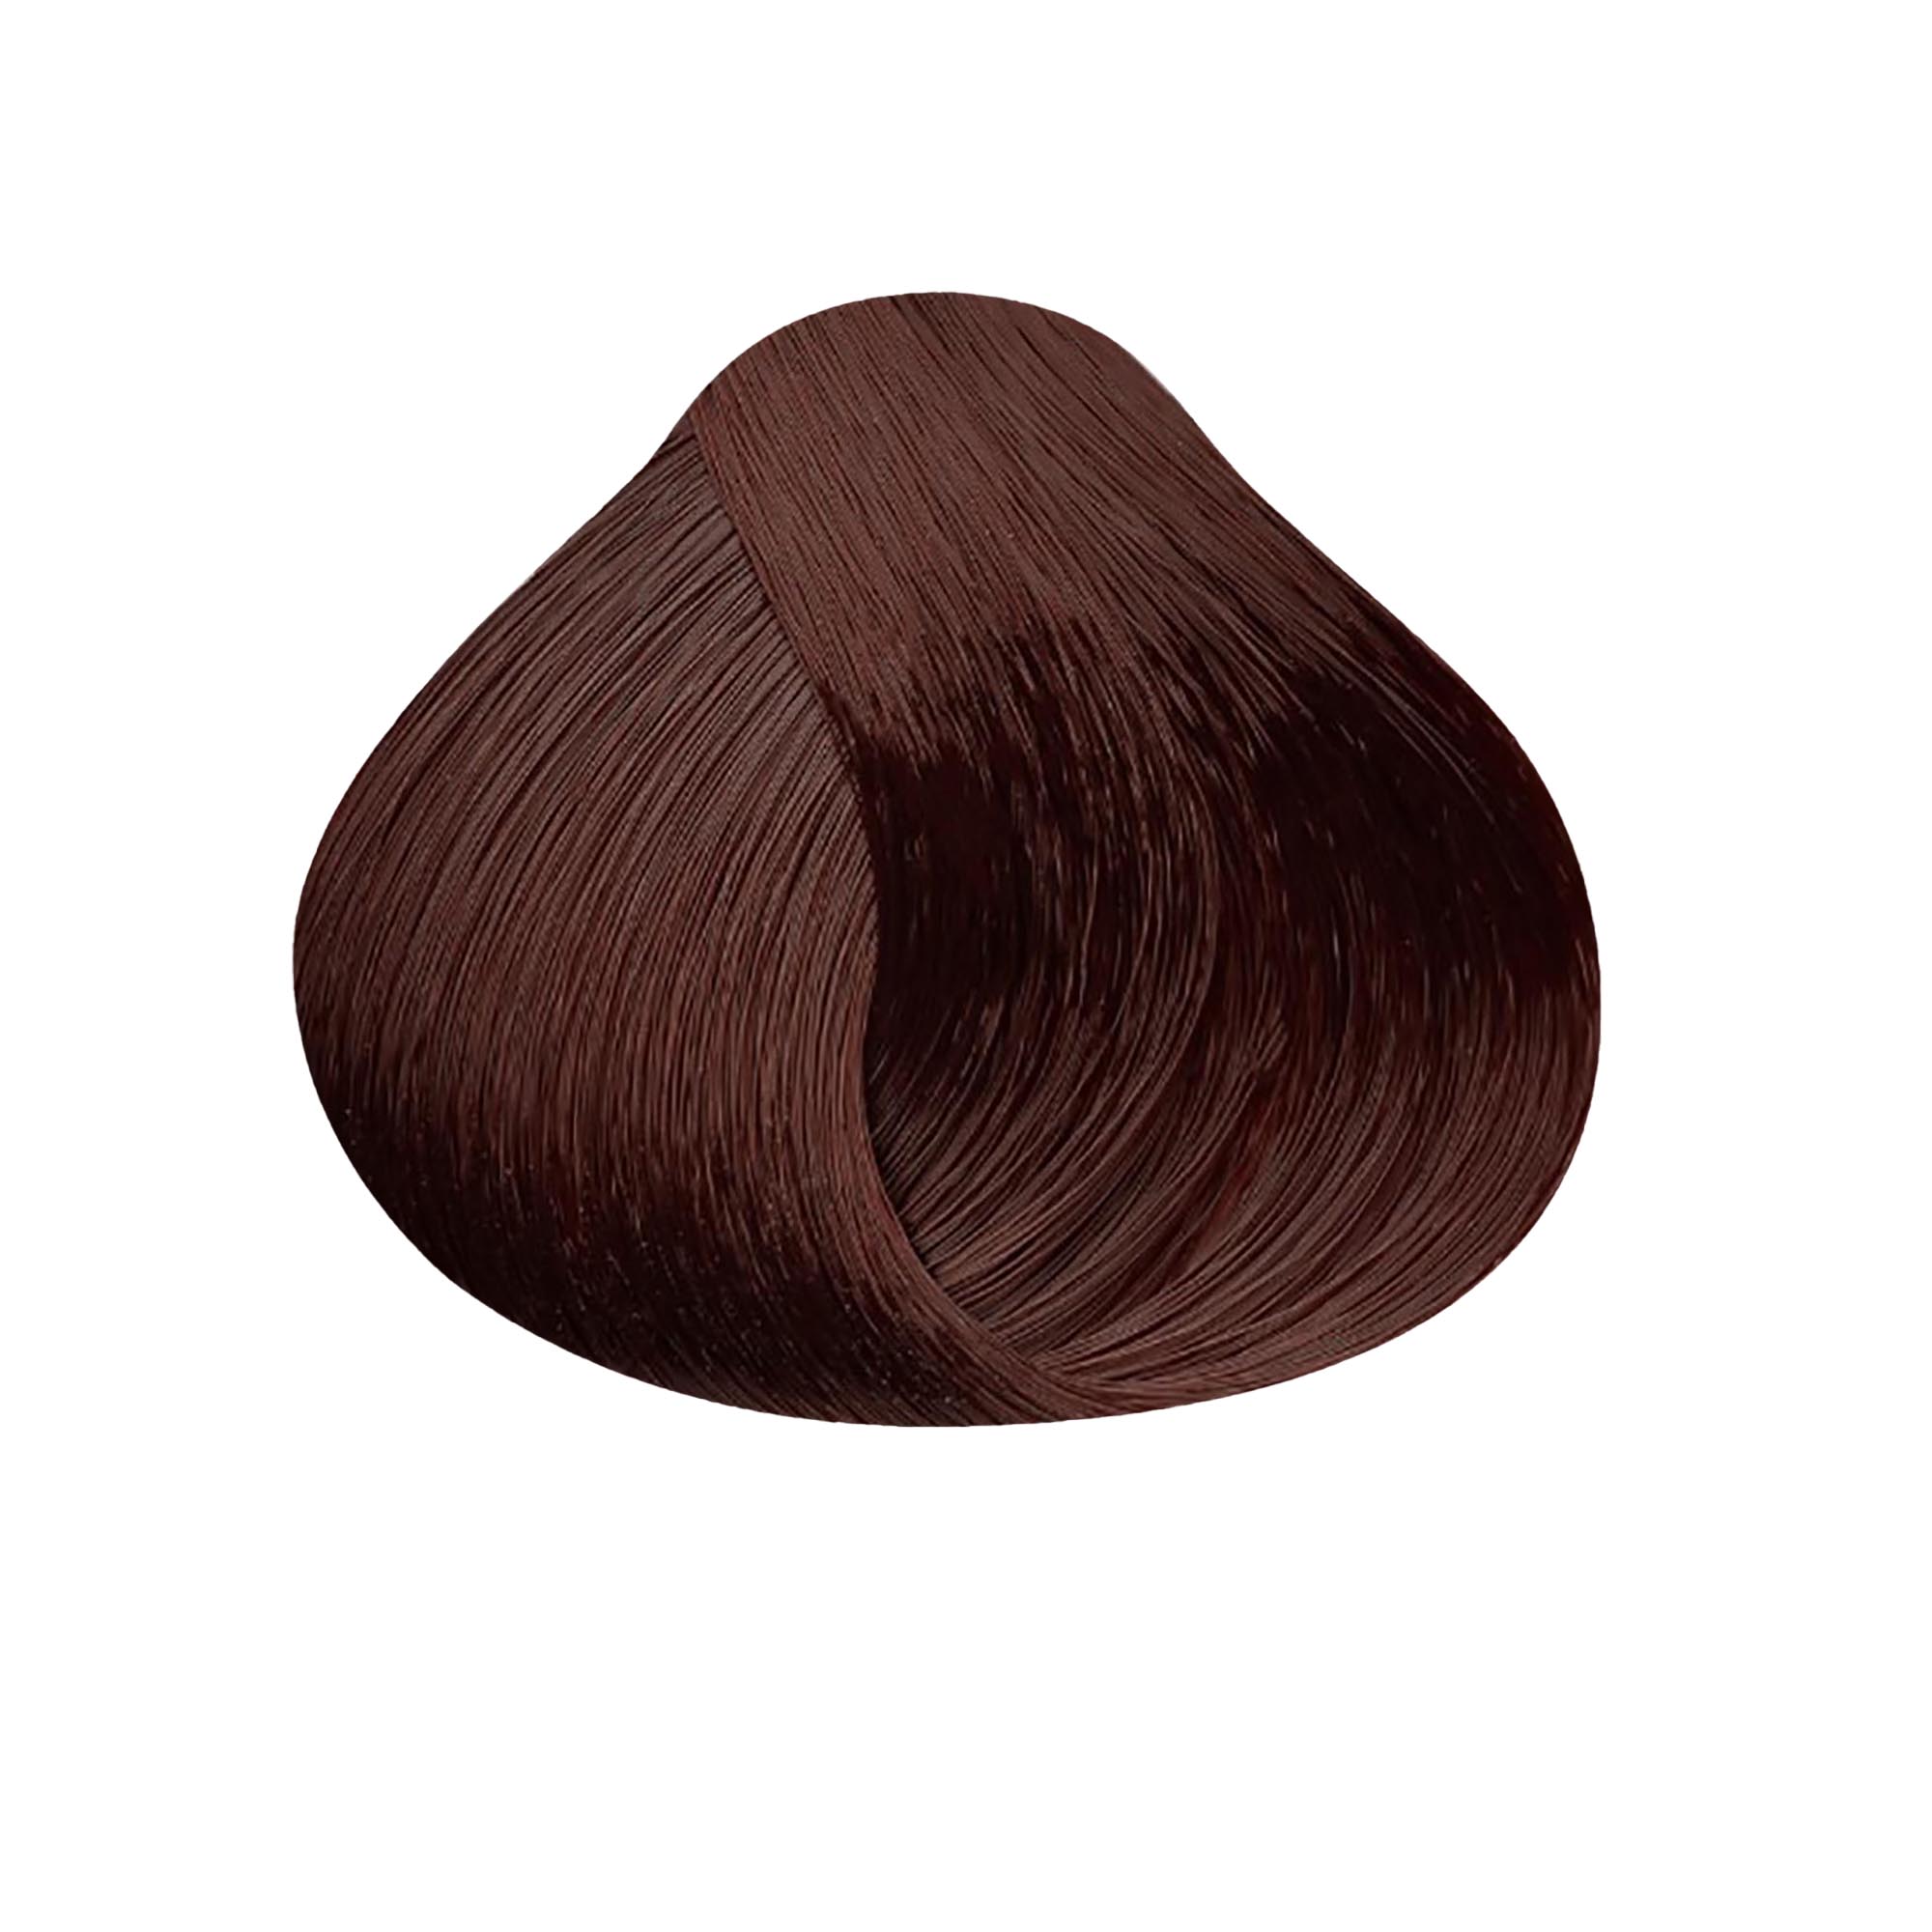 Satin Professional Hair Color / 6M Mahogany Blonde / Swatch